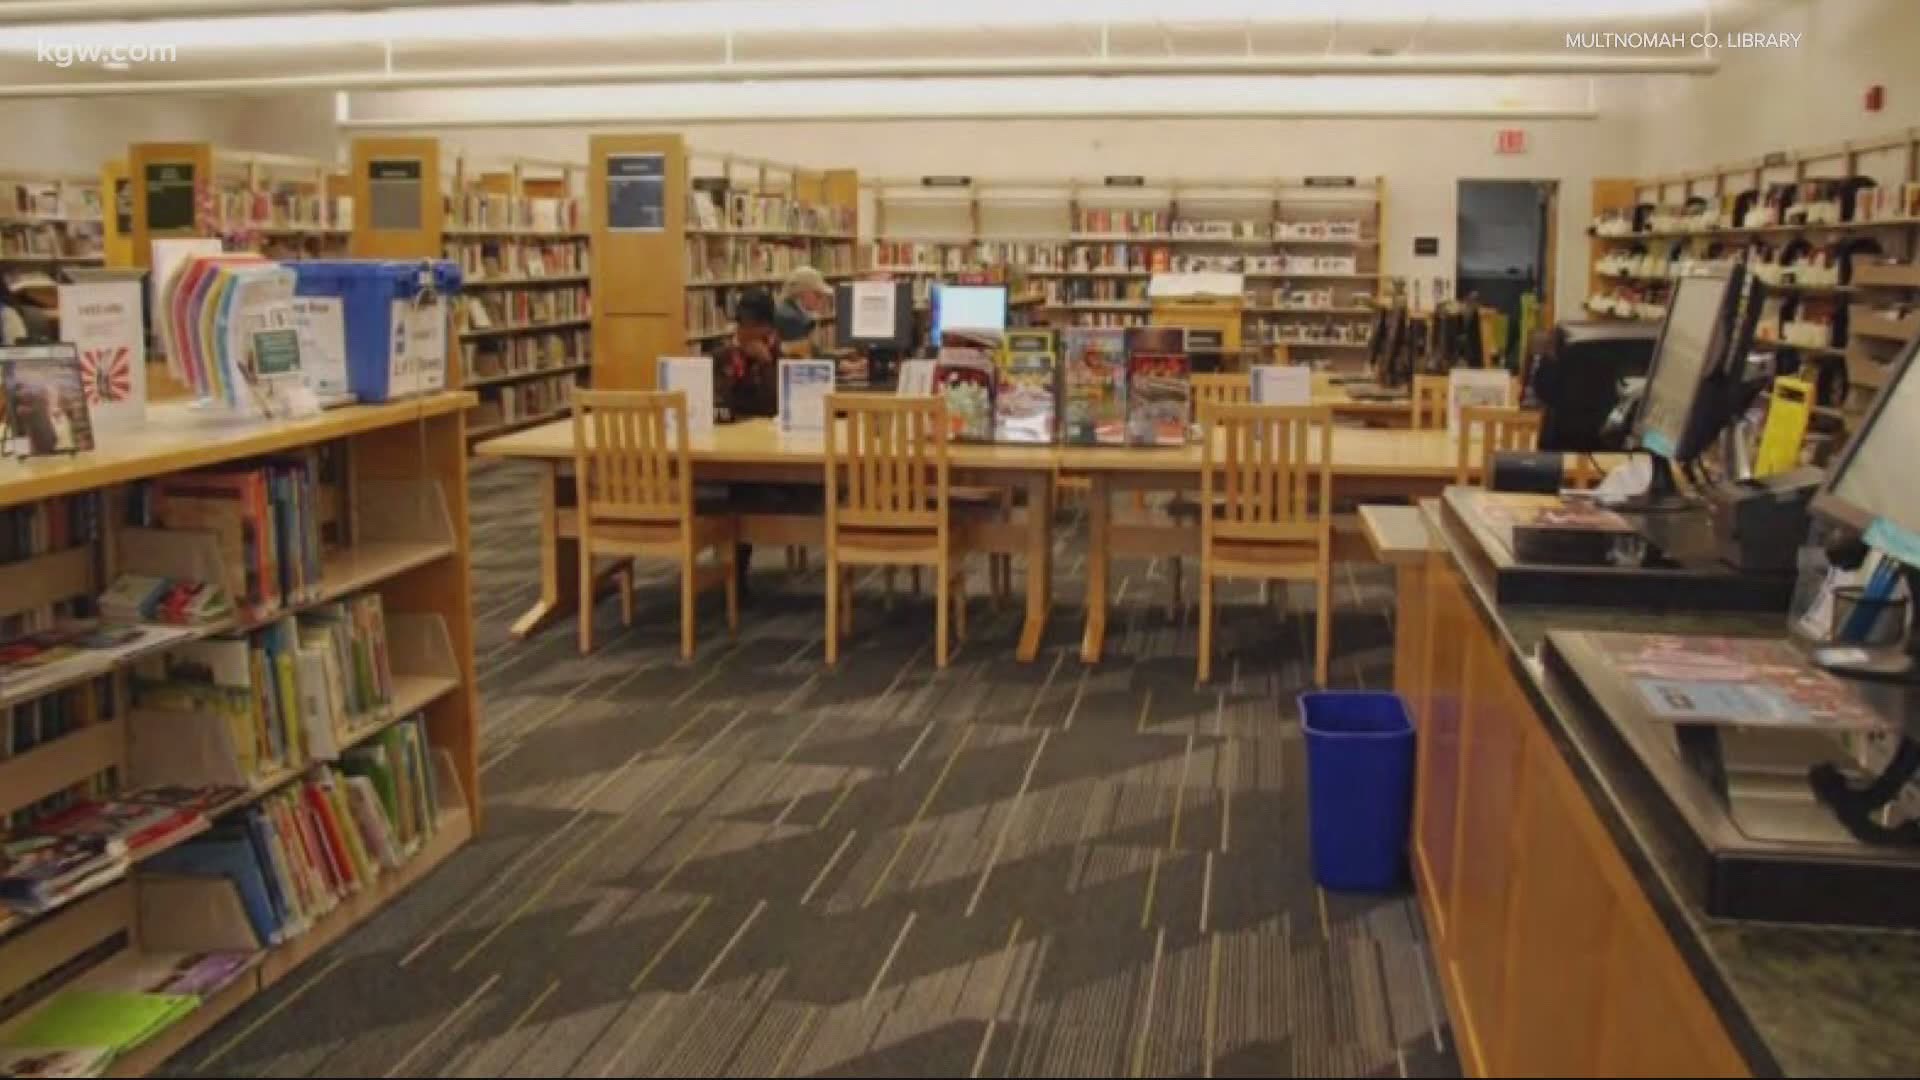 Librarians in Multnomah County are publicly pushing back against looming layoffs, ones they worry will disproportionately impact people of color.